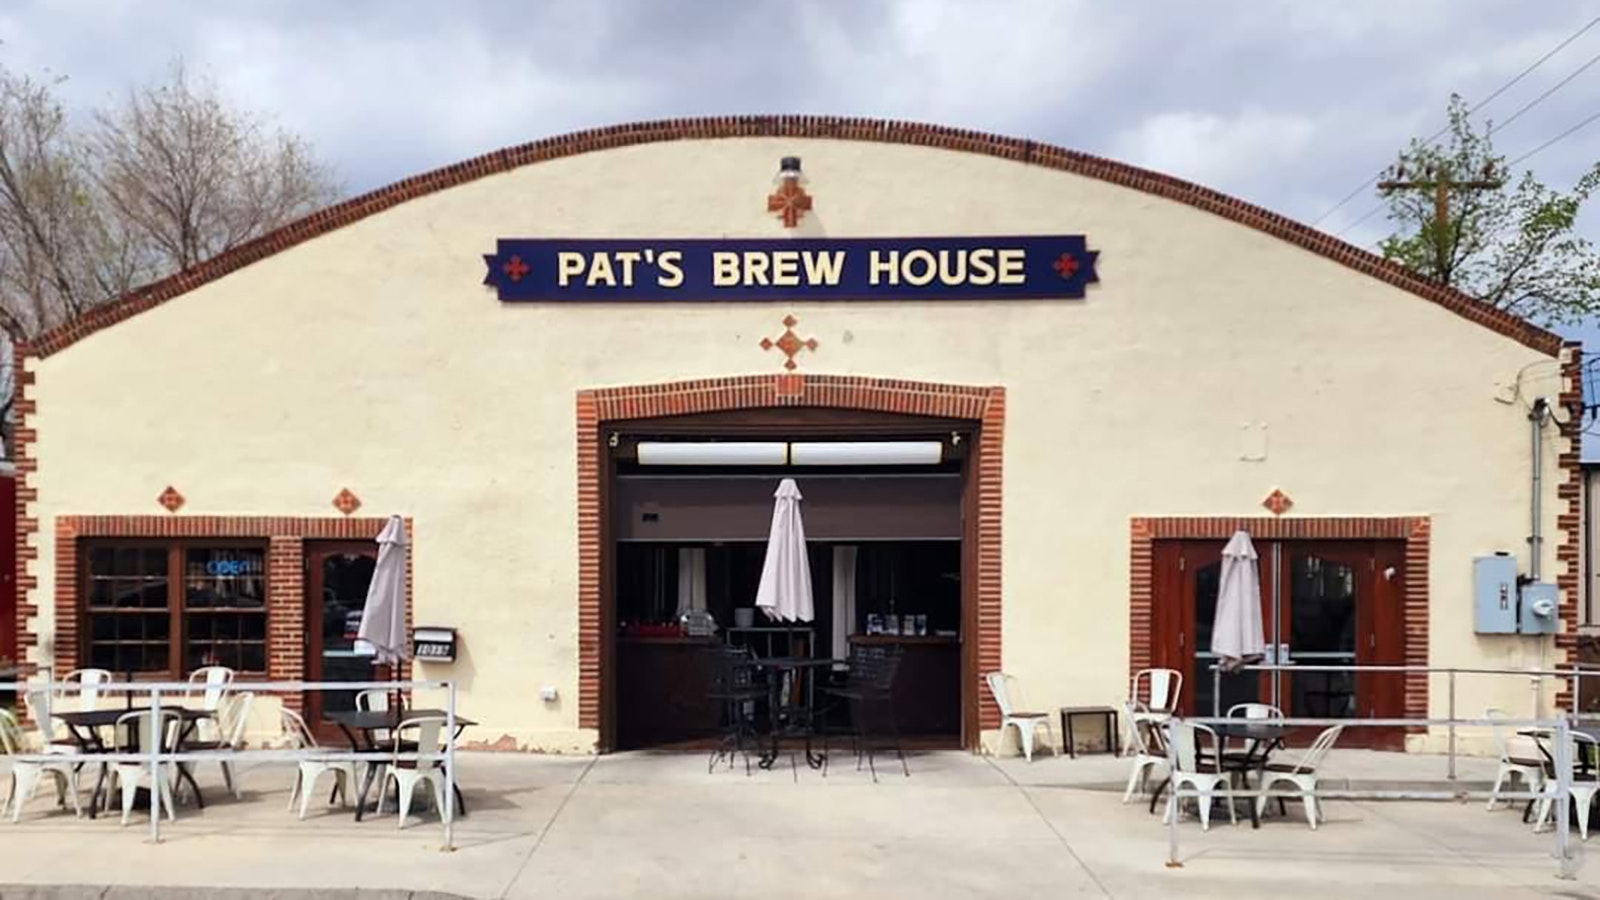 Pat's Brew House is located just off main street in Cody in a building that was built in 1917 as a car garage.